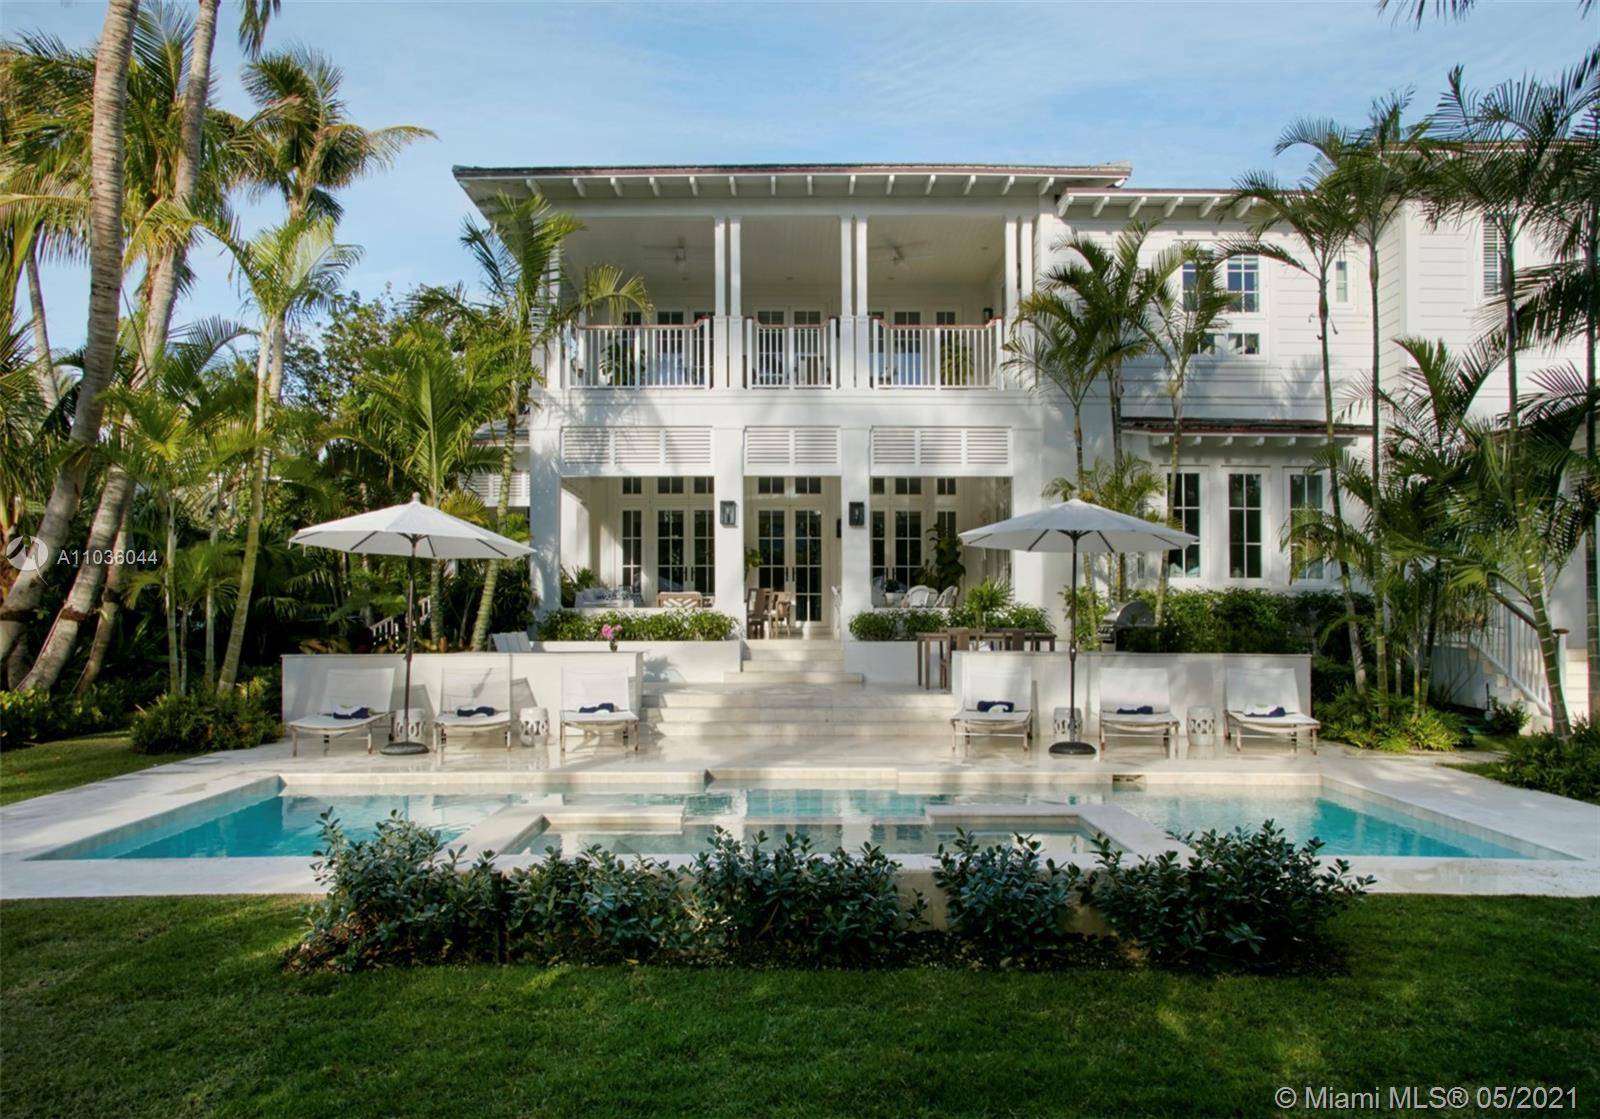 Anglo Caribbean classic. A remarkable 6 bedroom house on Bay Lane with interiors by James Duncan Inc.